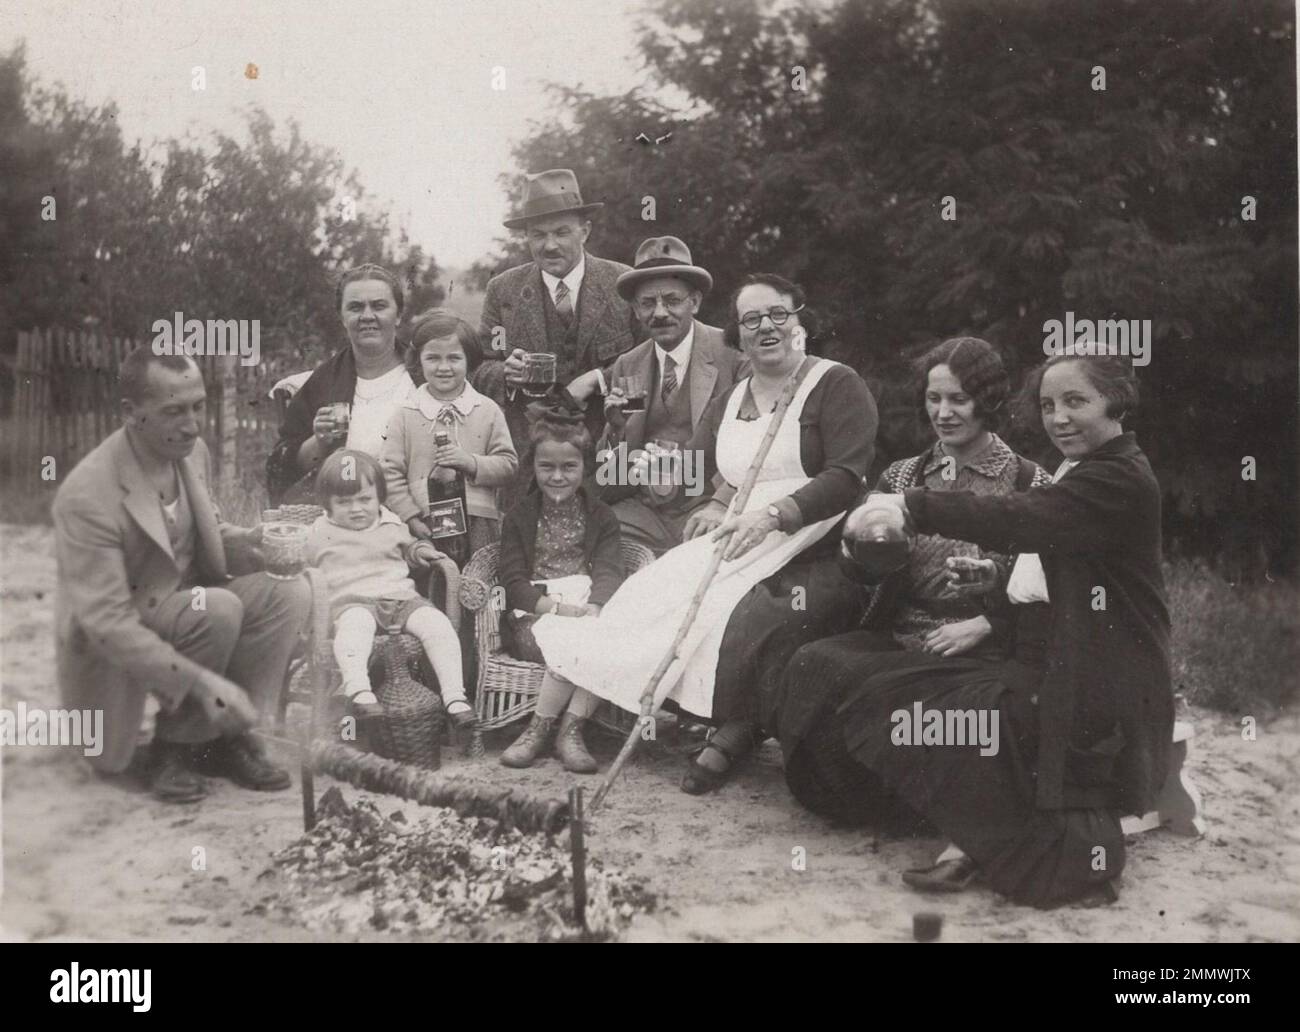 Vintage drinking / life event / celebrations / family photo / friends photo / vintage trip / vintage celebration / group photo / vintage family / vintage friends / Additional-Rights-Clearences-Not Available Stock Photo